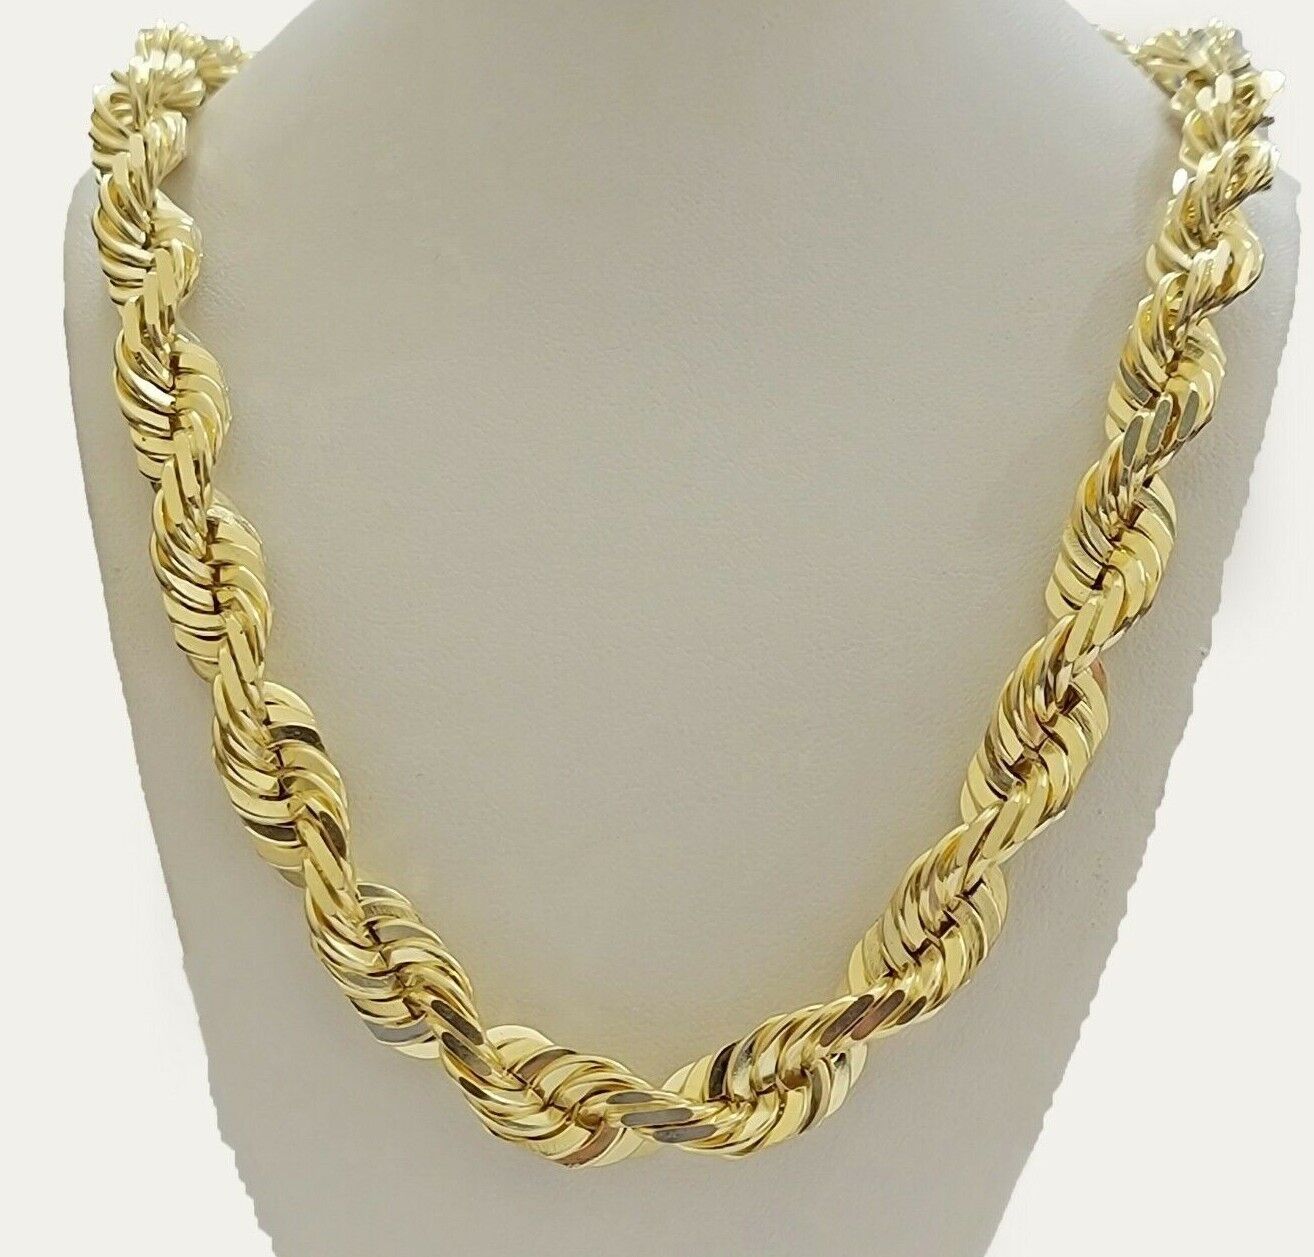 10k & 14k Solid Gold Chains - 100% Real Gold